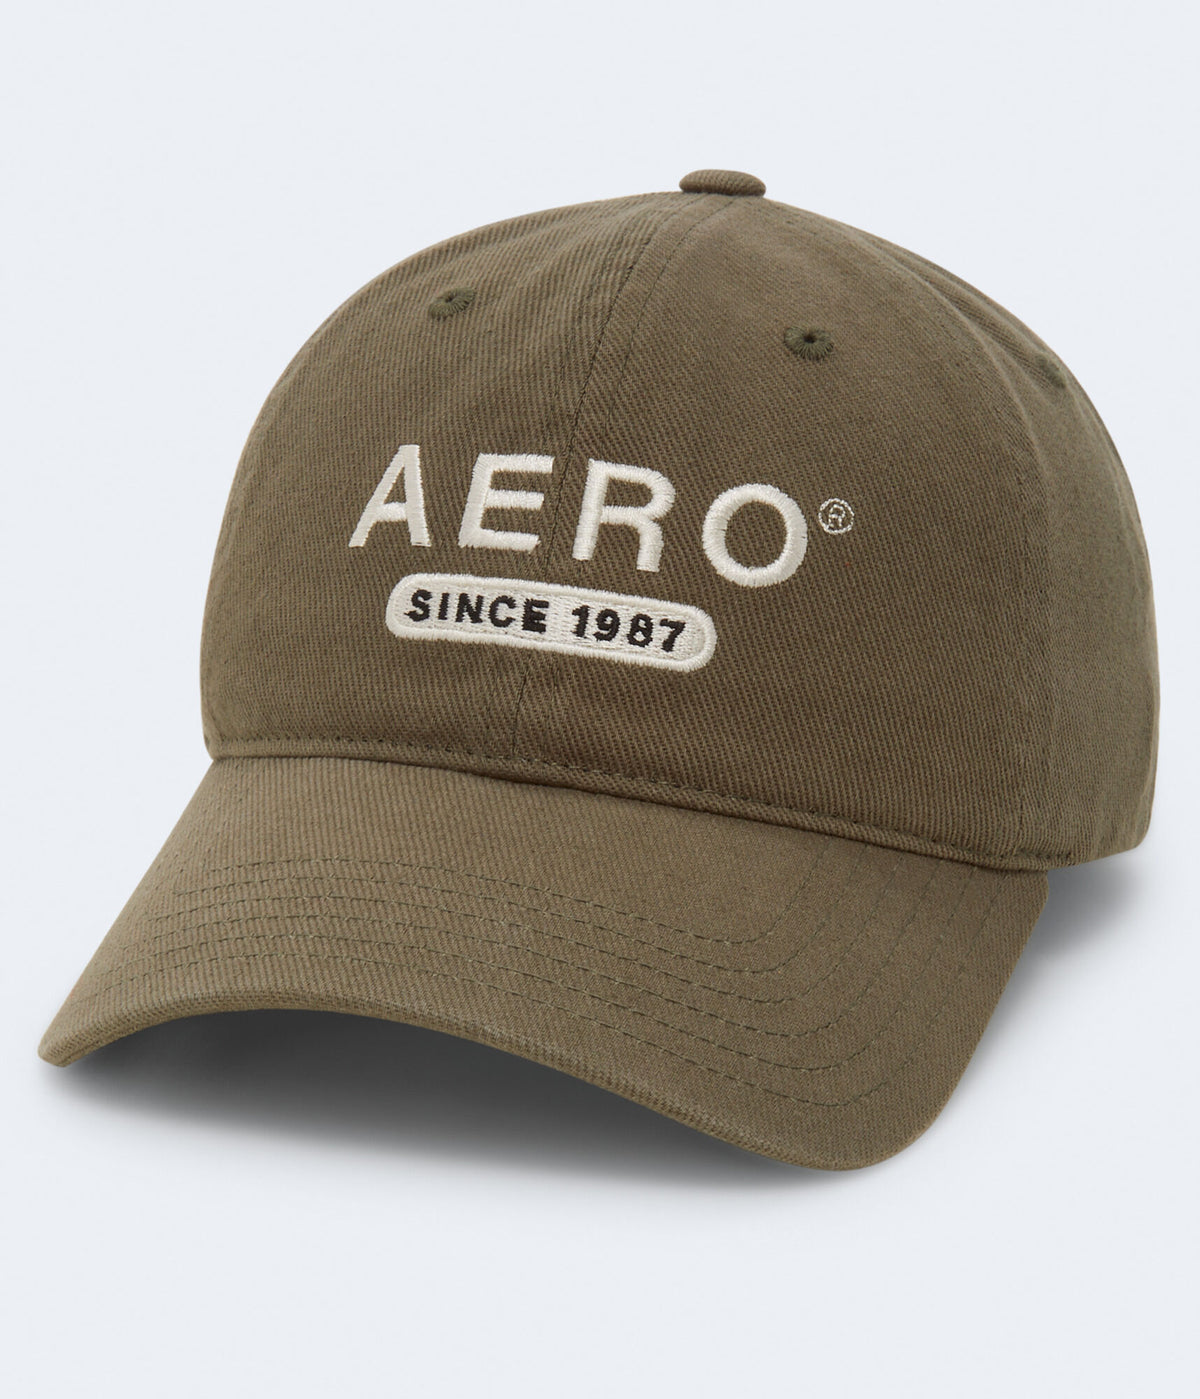 Aeropostale Mens' Since 1987 Adjustable Hat - Light Green - Size One Size - Cotton - Teen Fashion & Clothing Caper Green